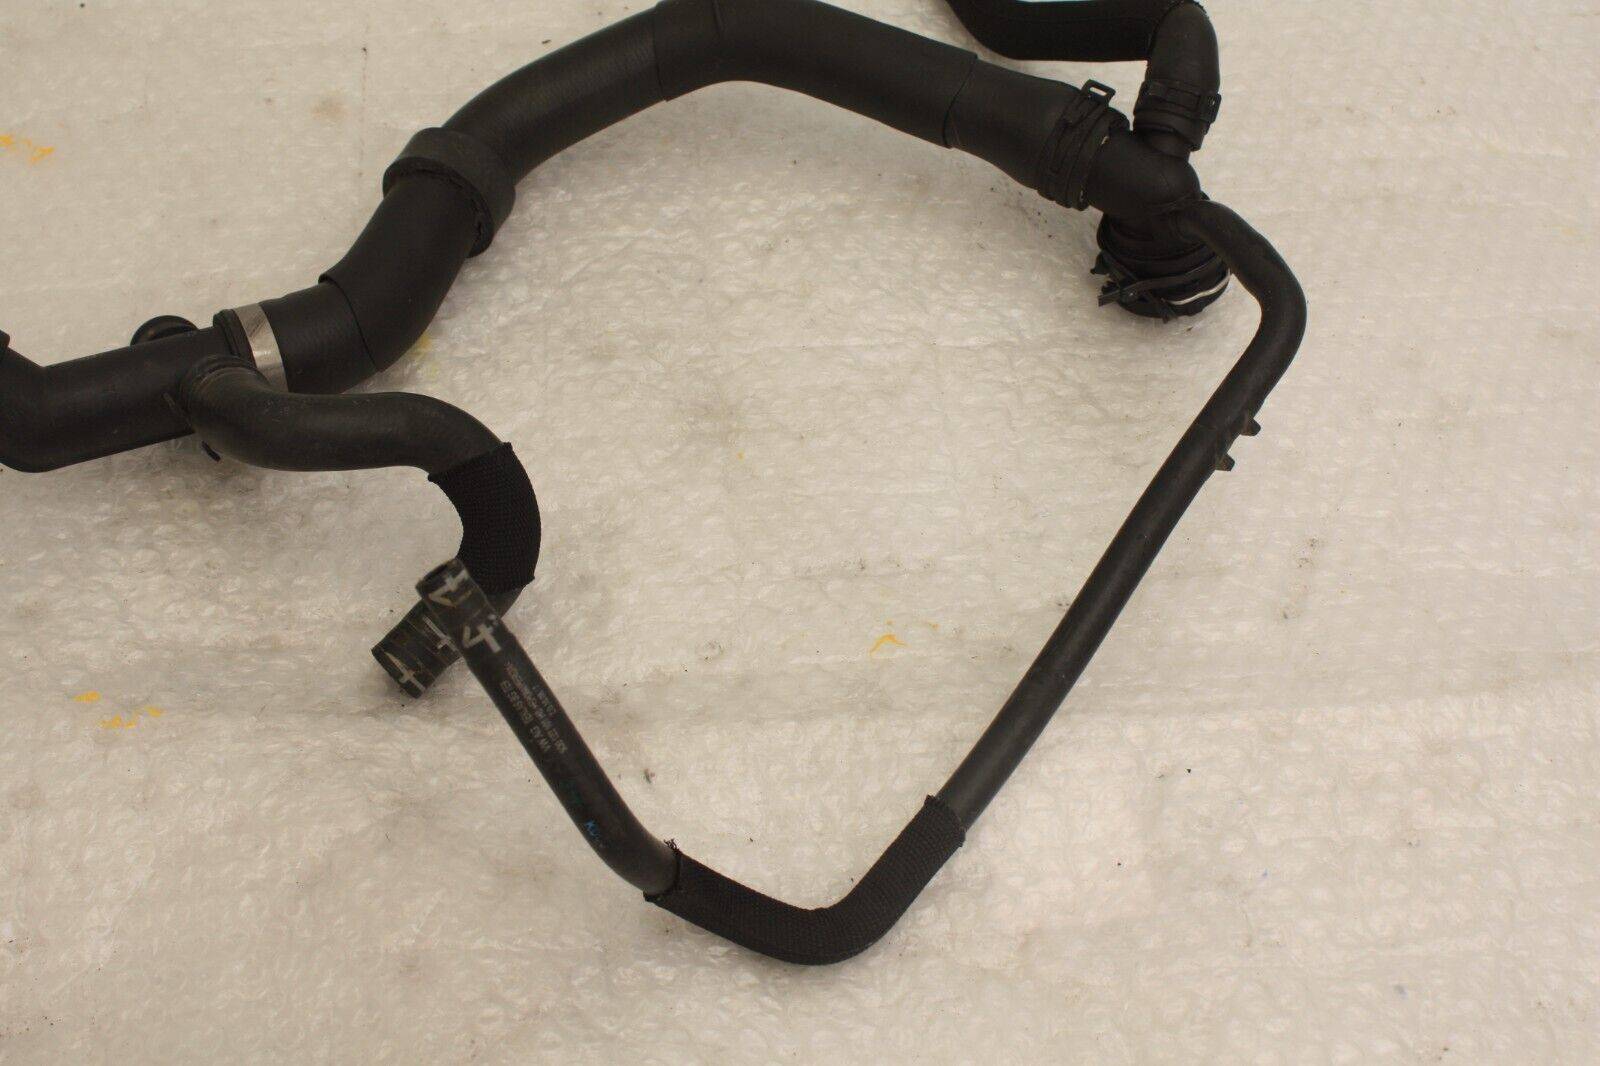 VW-Golf-Water-Coolant-Pipes-Hose-5Q0122101-Genuine-176375079536-12